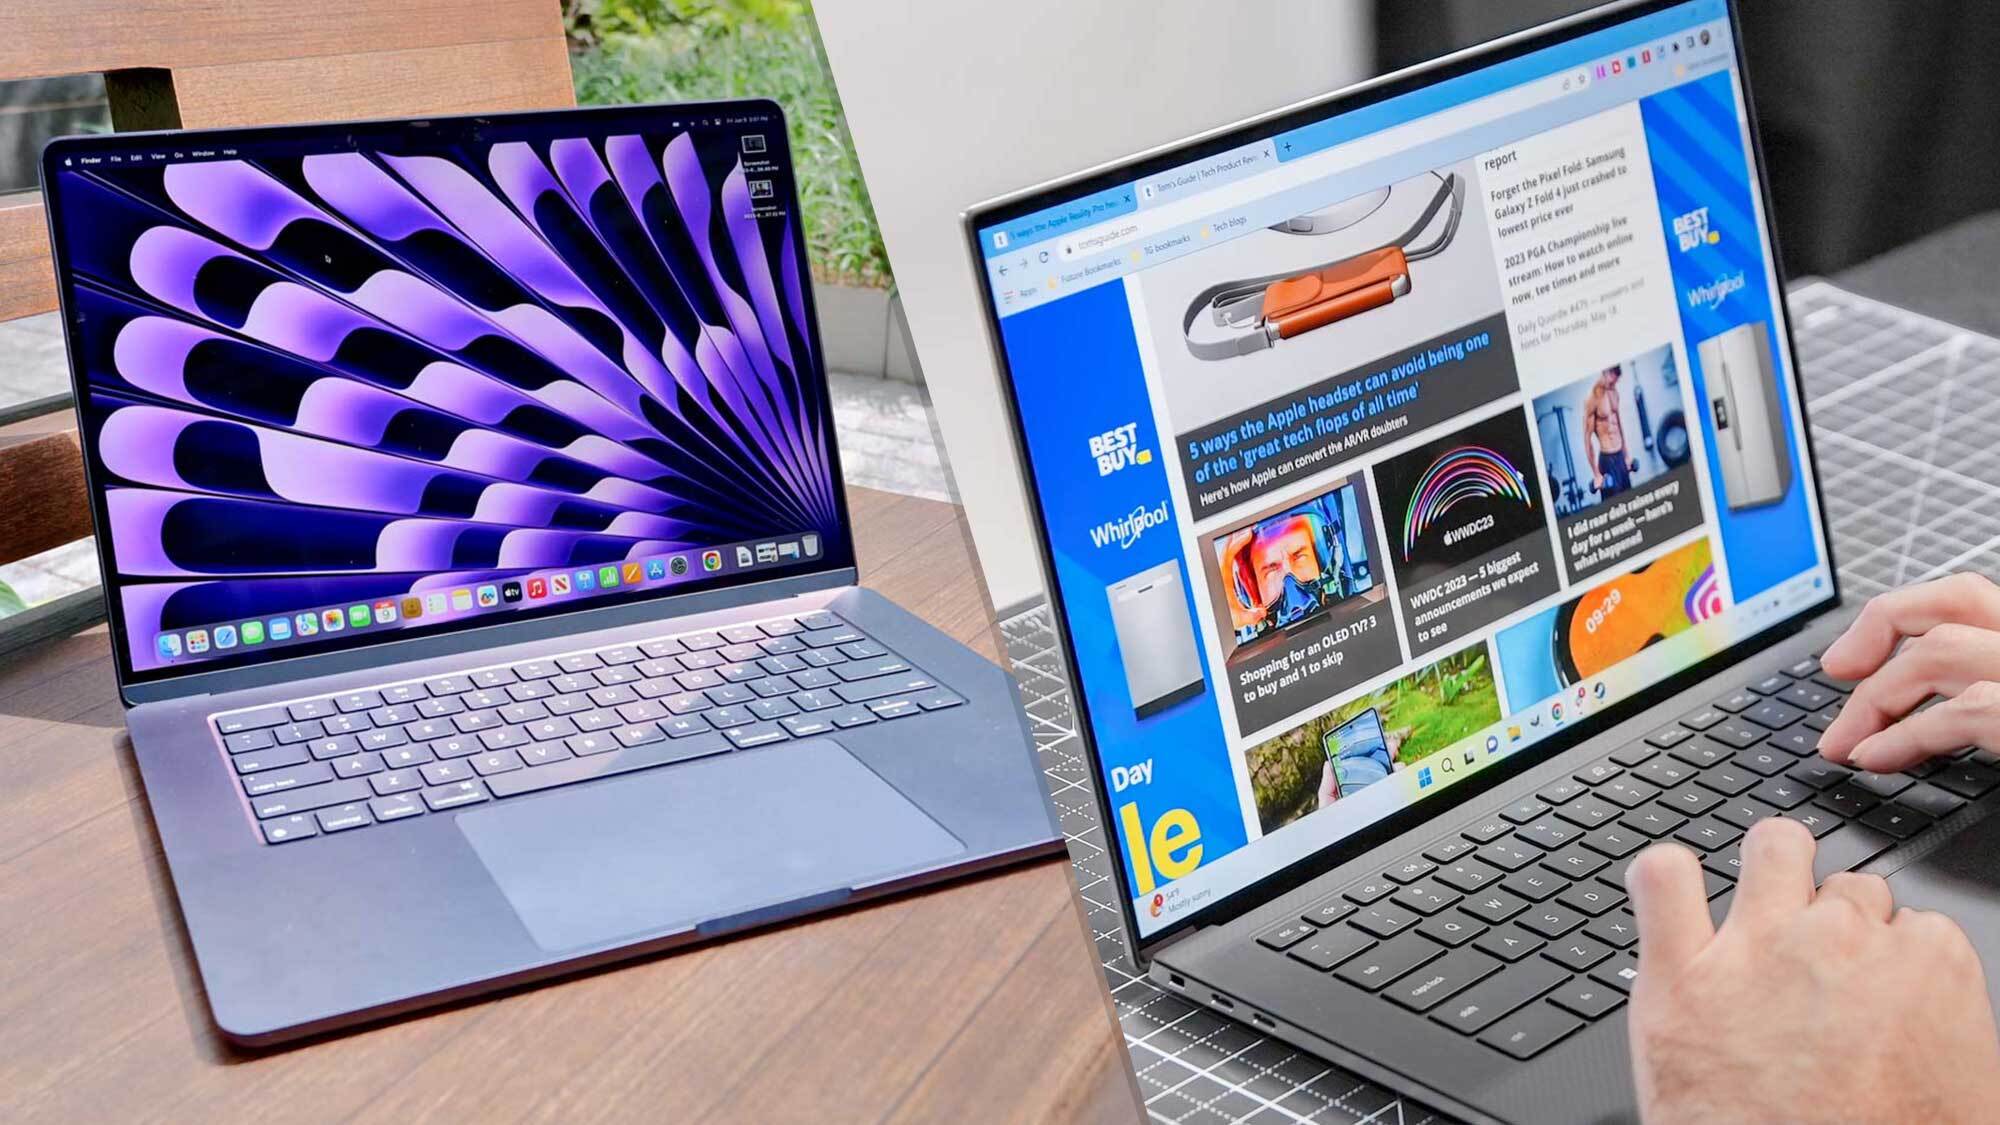 MacBook Air 15-inch vs Dell XPS 15 OLED: Which laptop wins